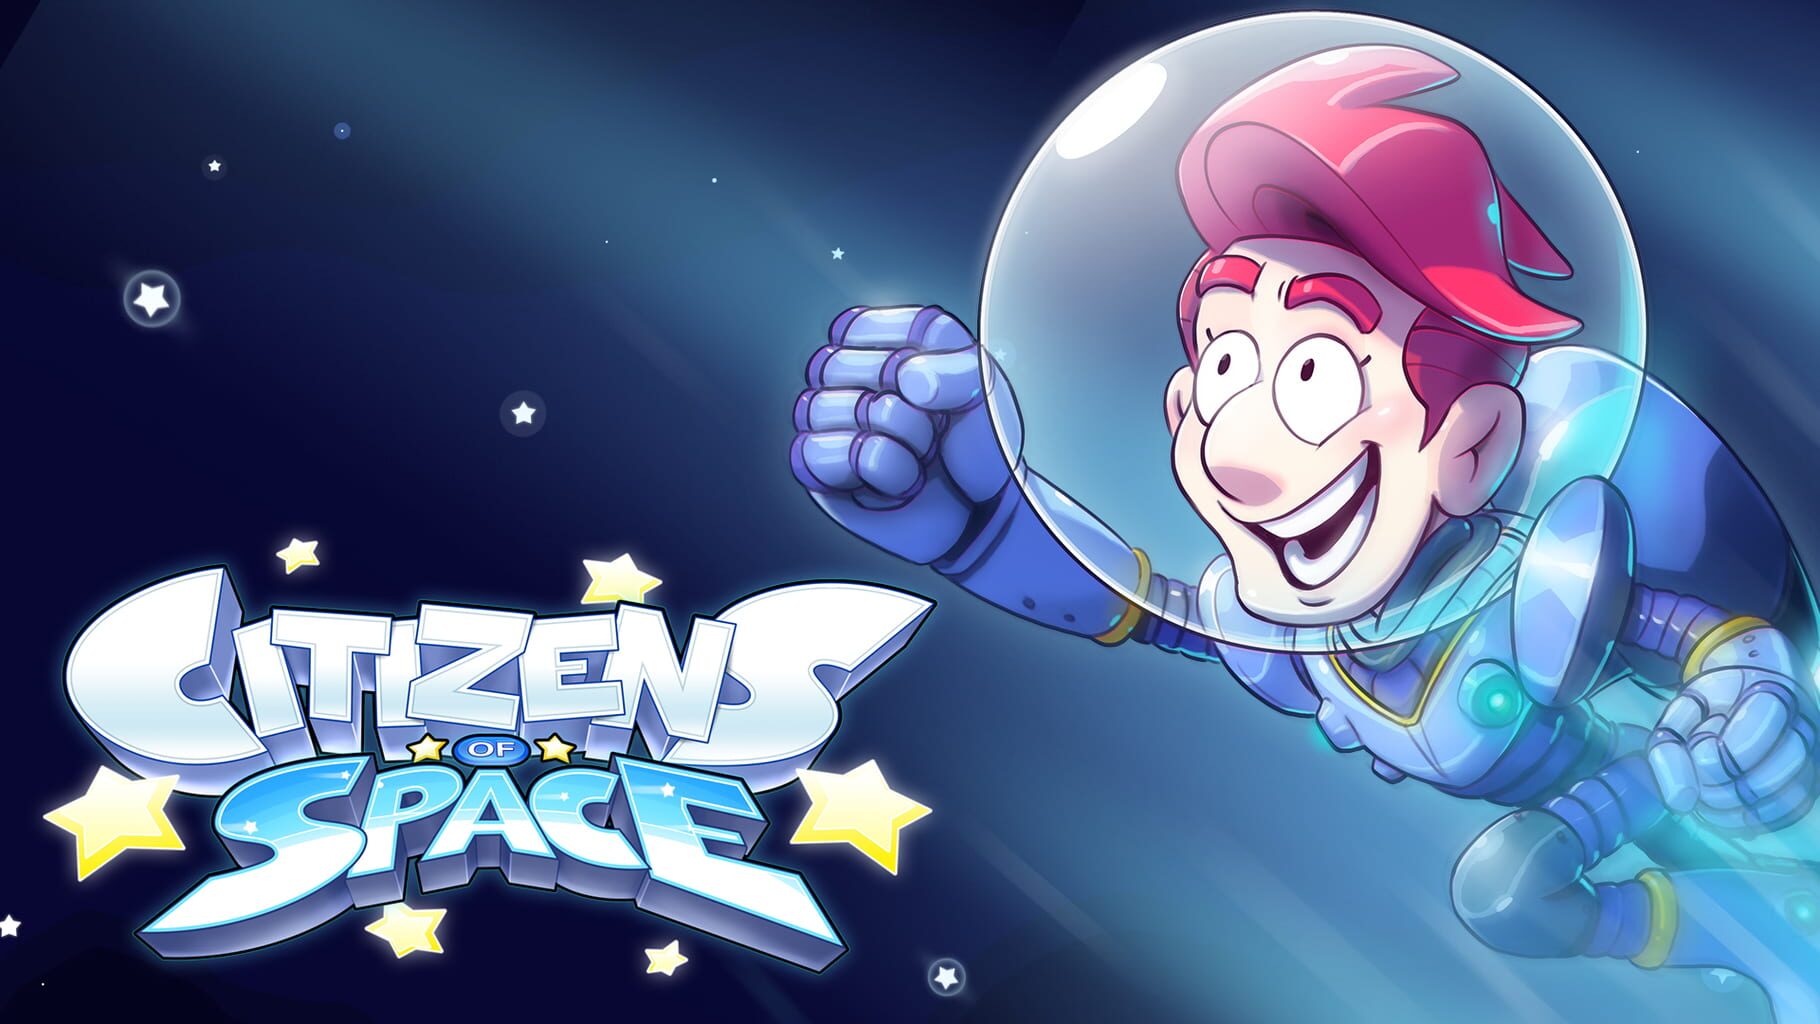 Citizens of Space artwork